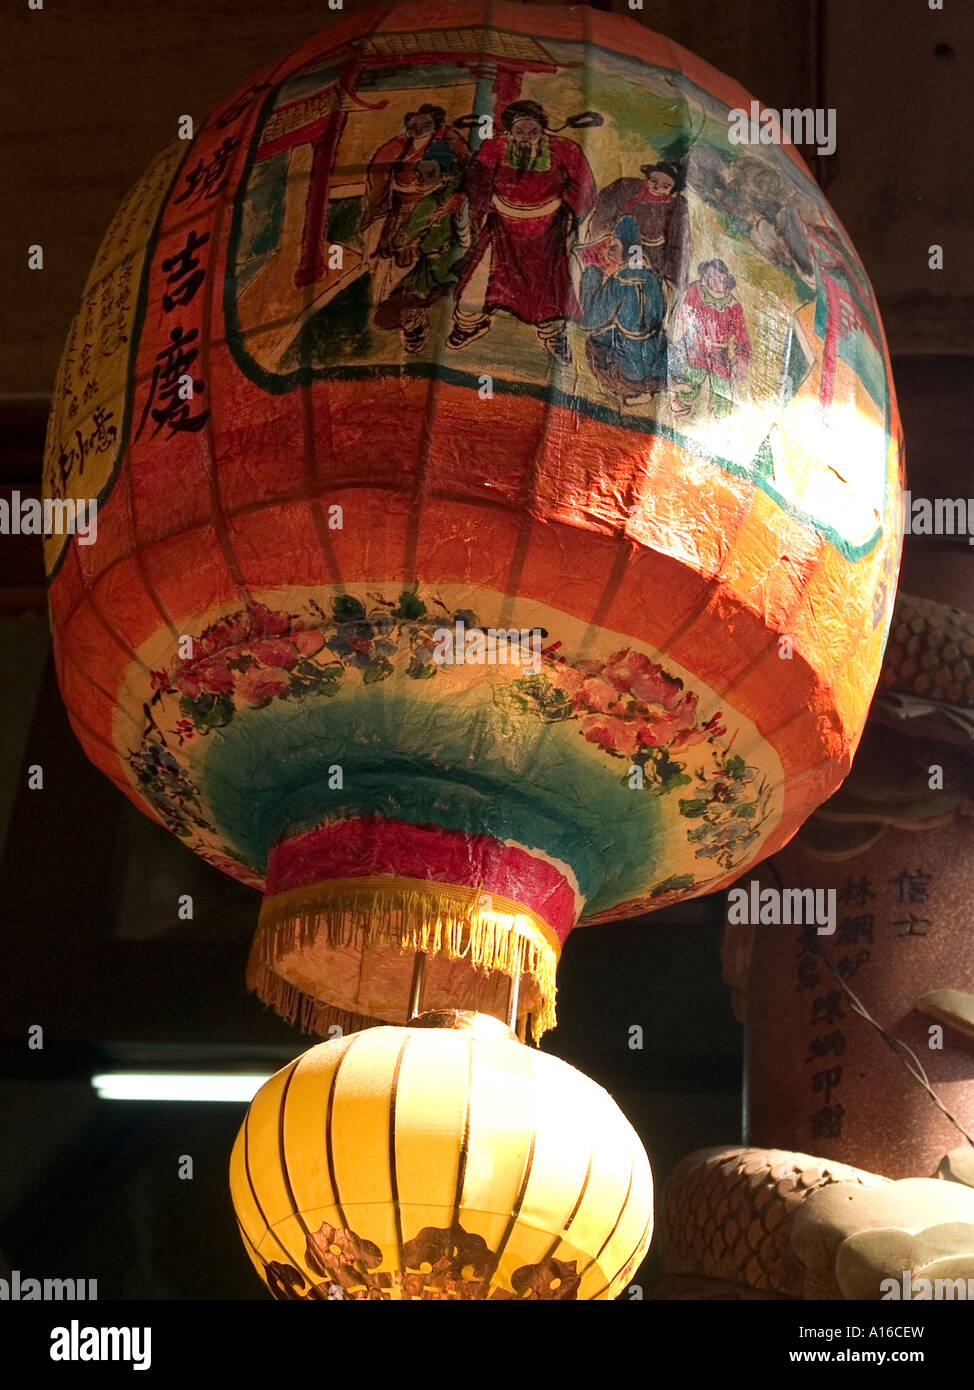 Large red paper lantern hang from the ceiling inside the Nan Thien temple Ampang Kuala Lumpur Malaysia Stock Photo